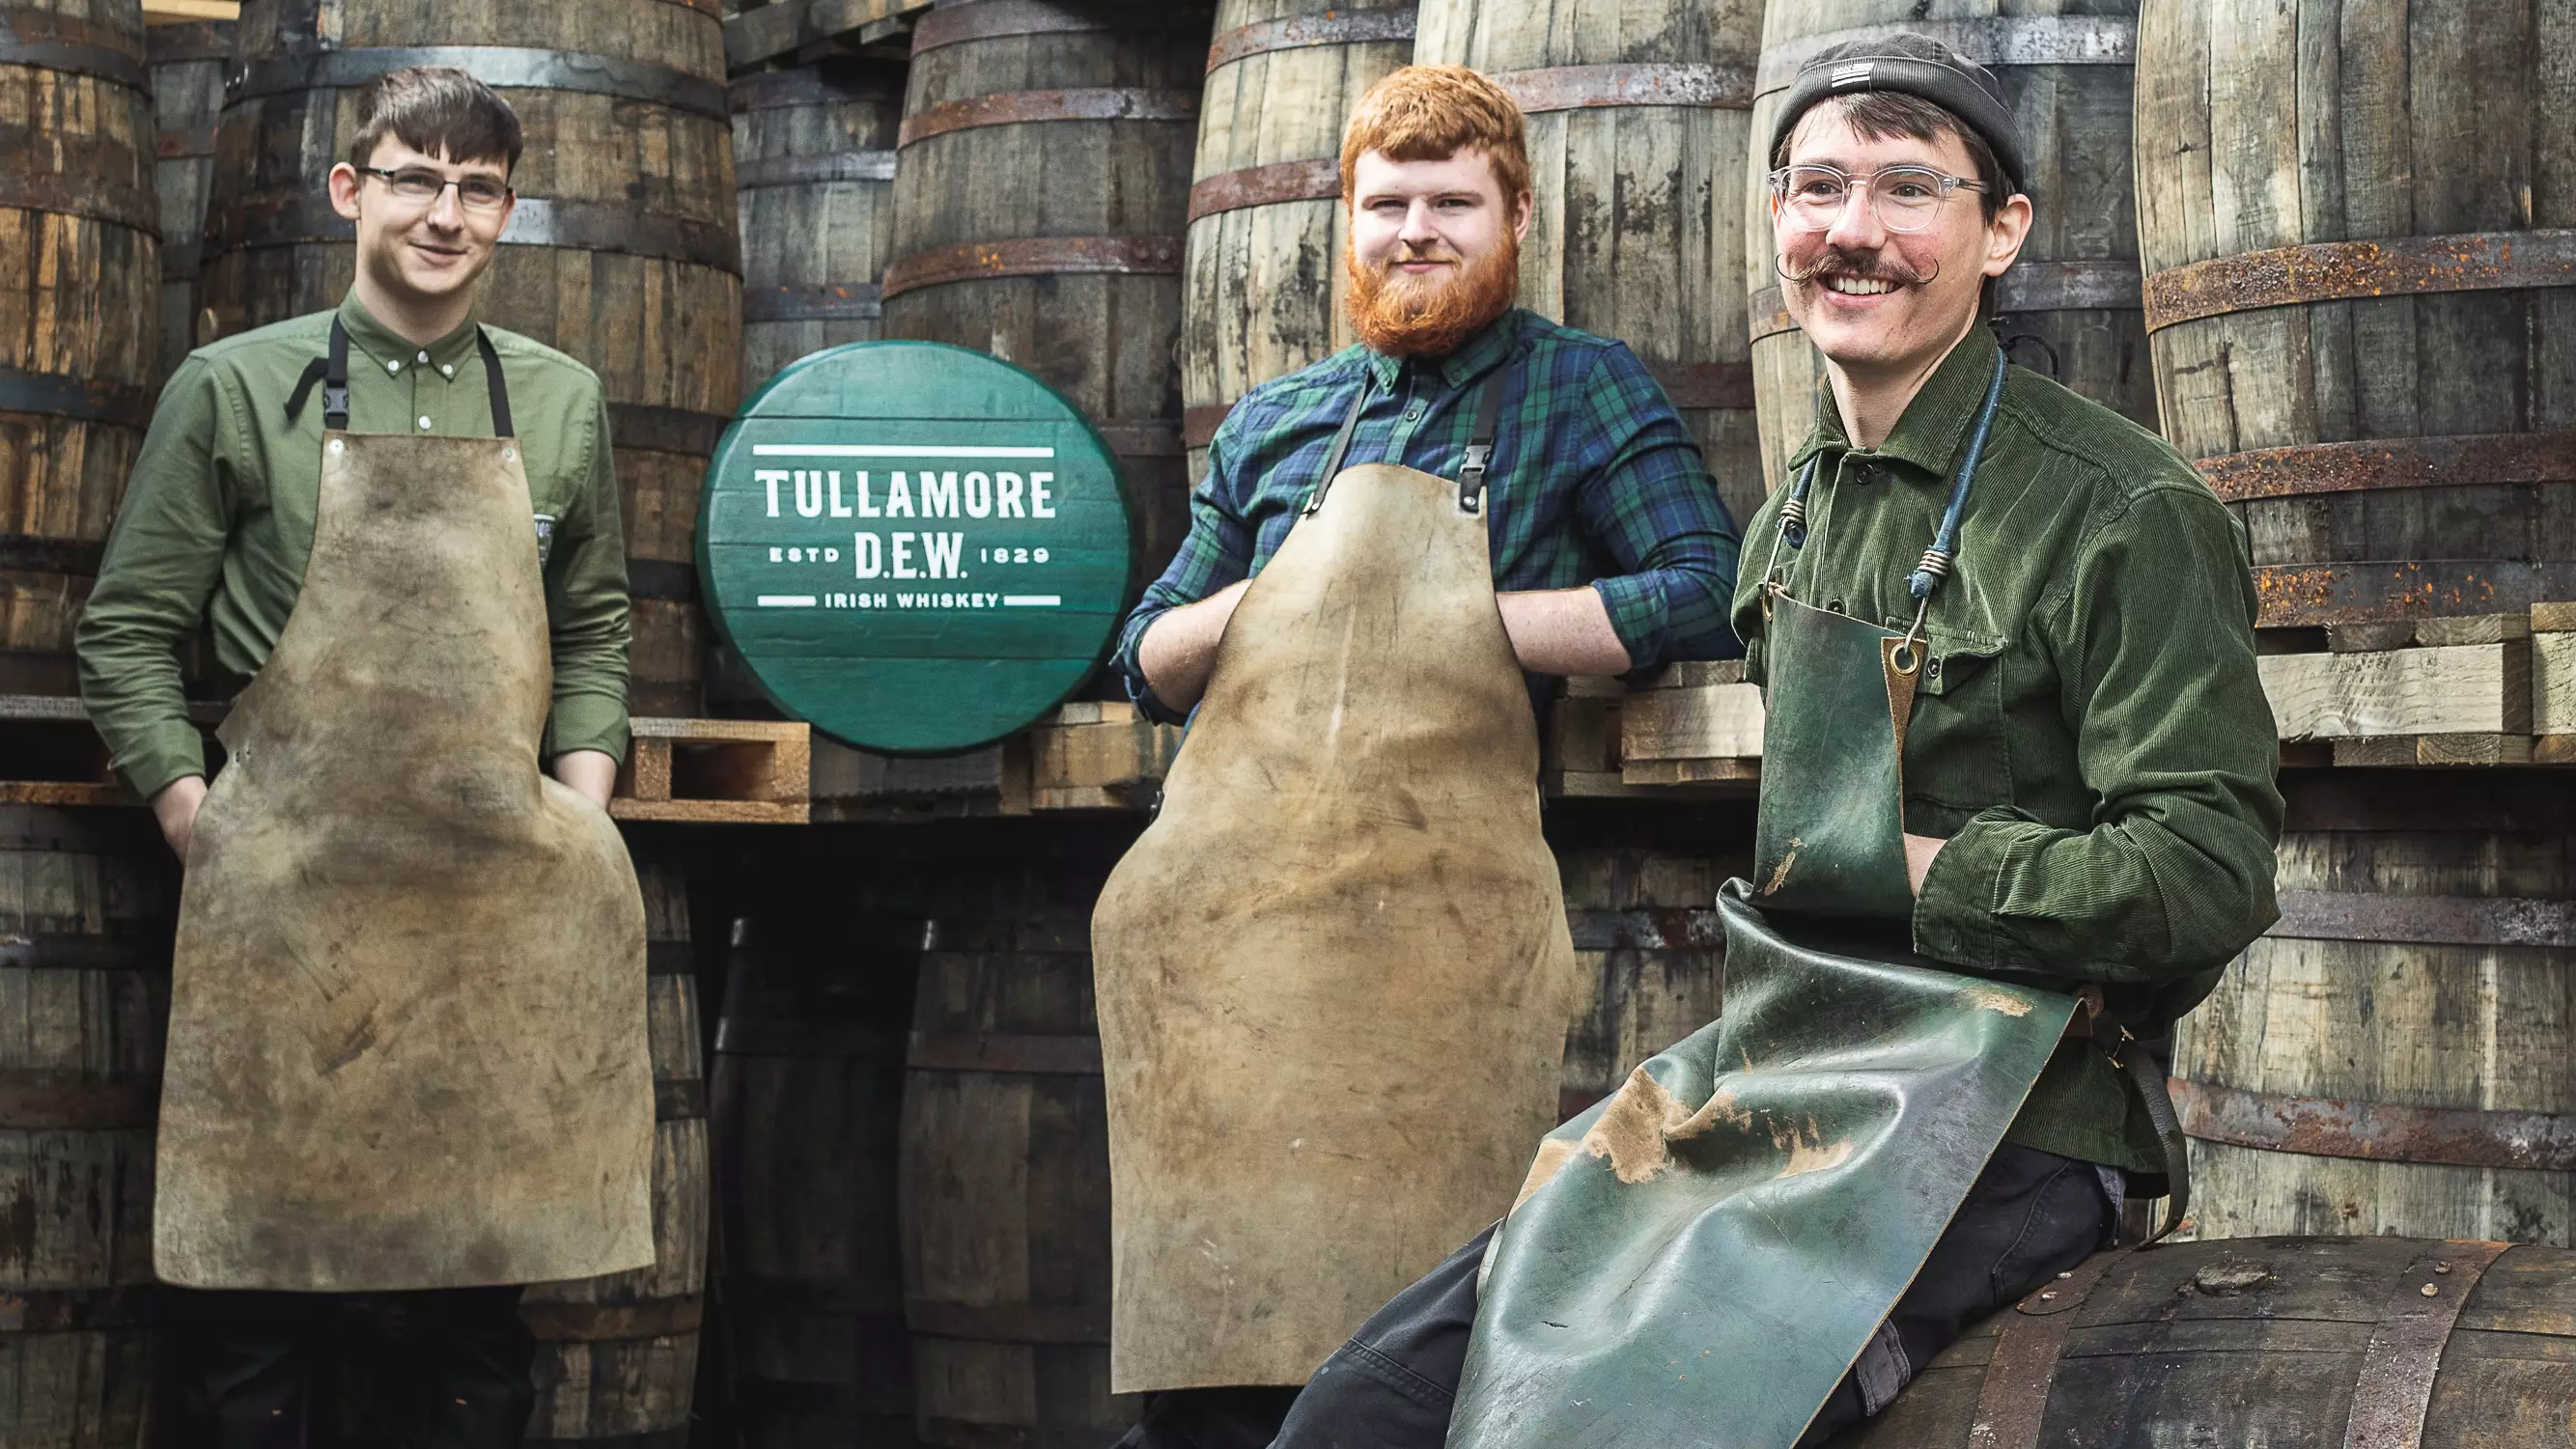 Tullamore D.E.W. Hires Two Offaly Teens As First Apprentice Coopers In 66 Years